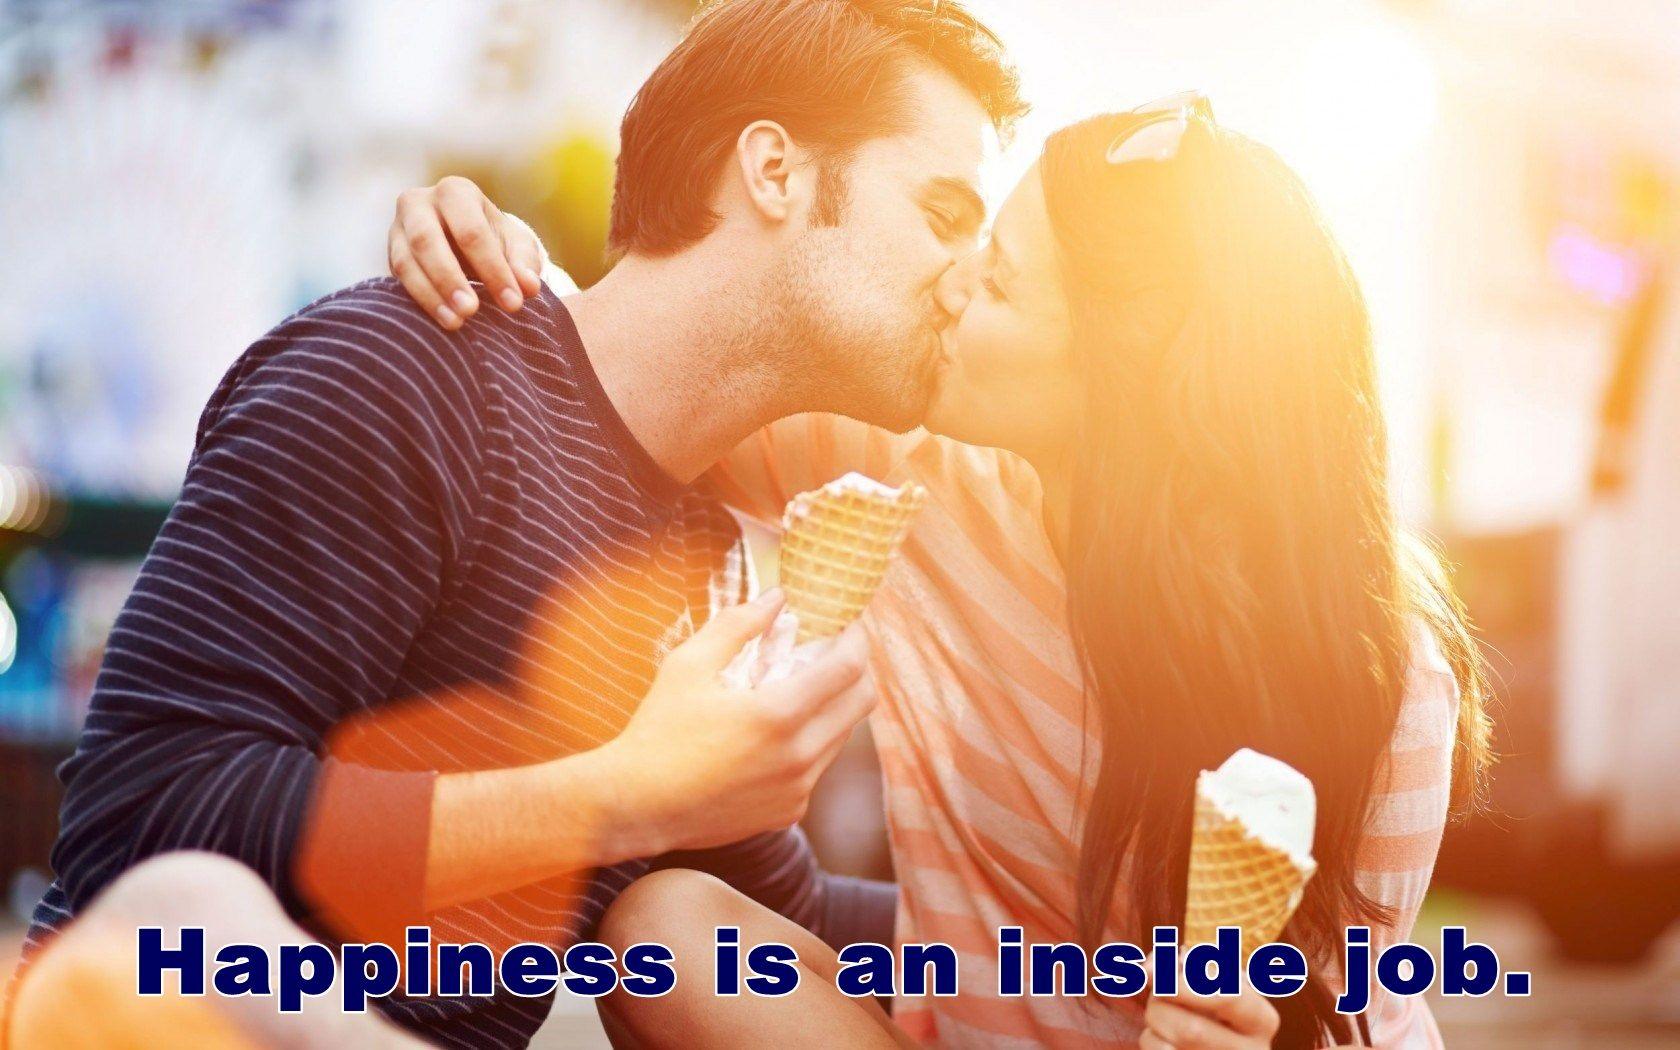 Happiness love kiss wallpaper with quote